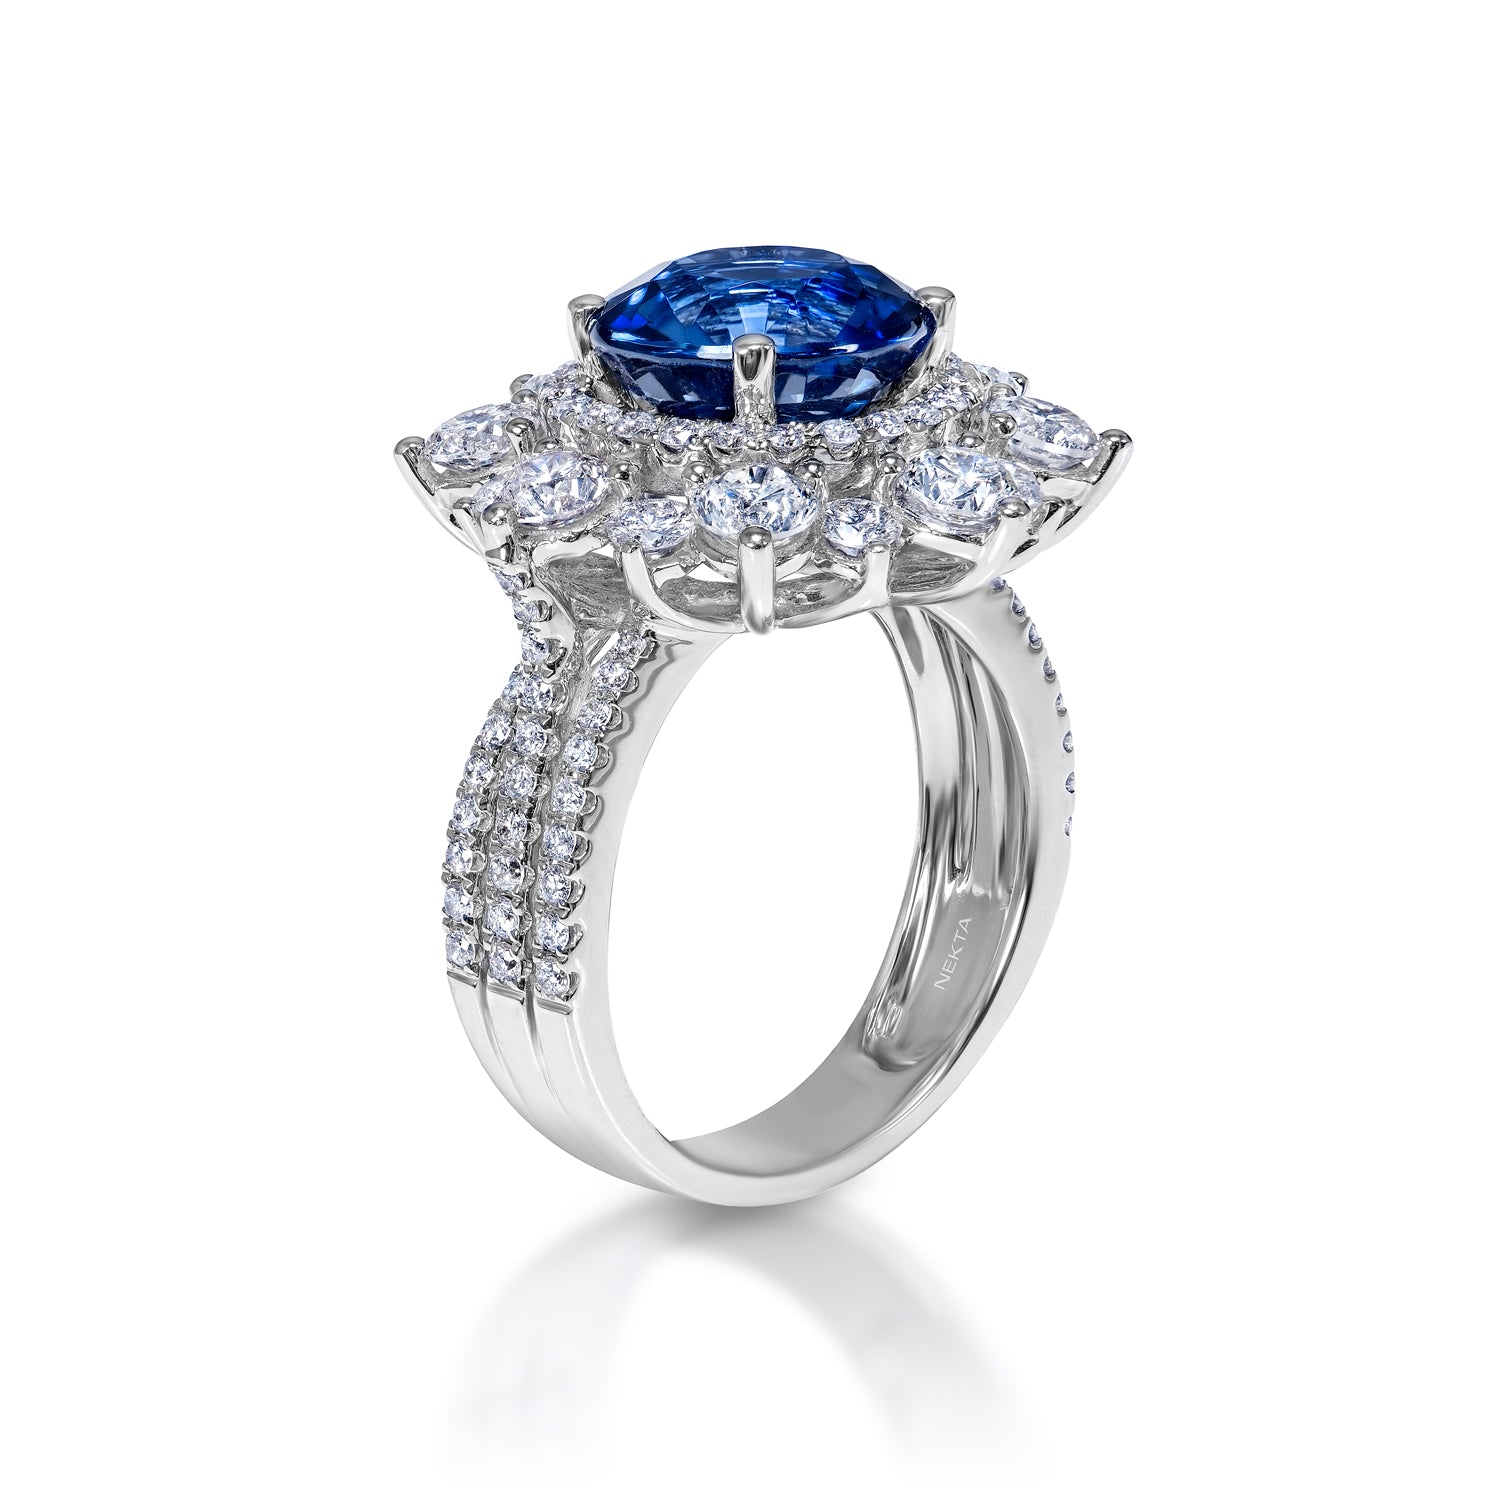 Evie 7 Carats Round Brilliant Blue Sapphire Ring in 18k White Gold Side View